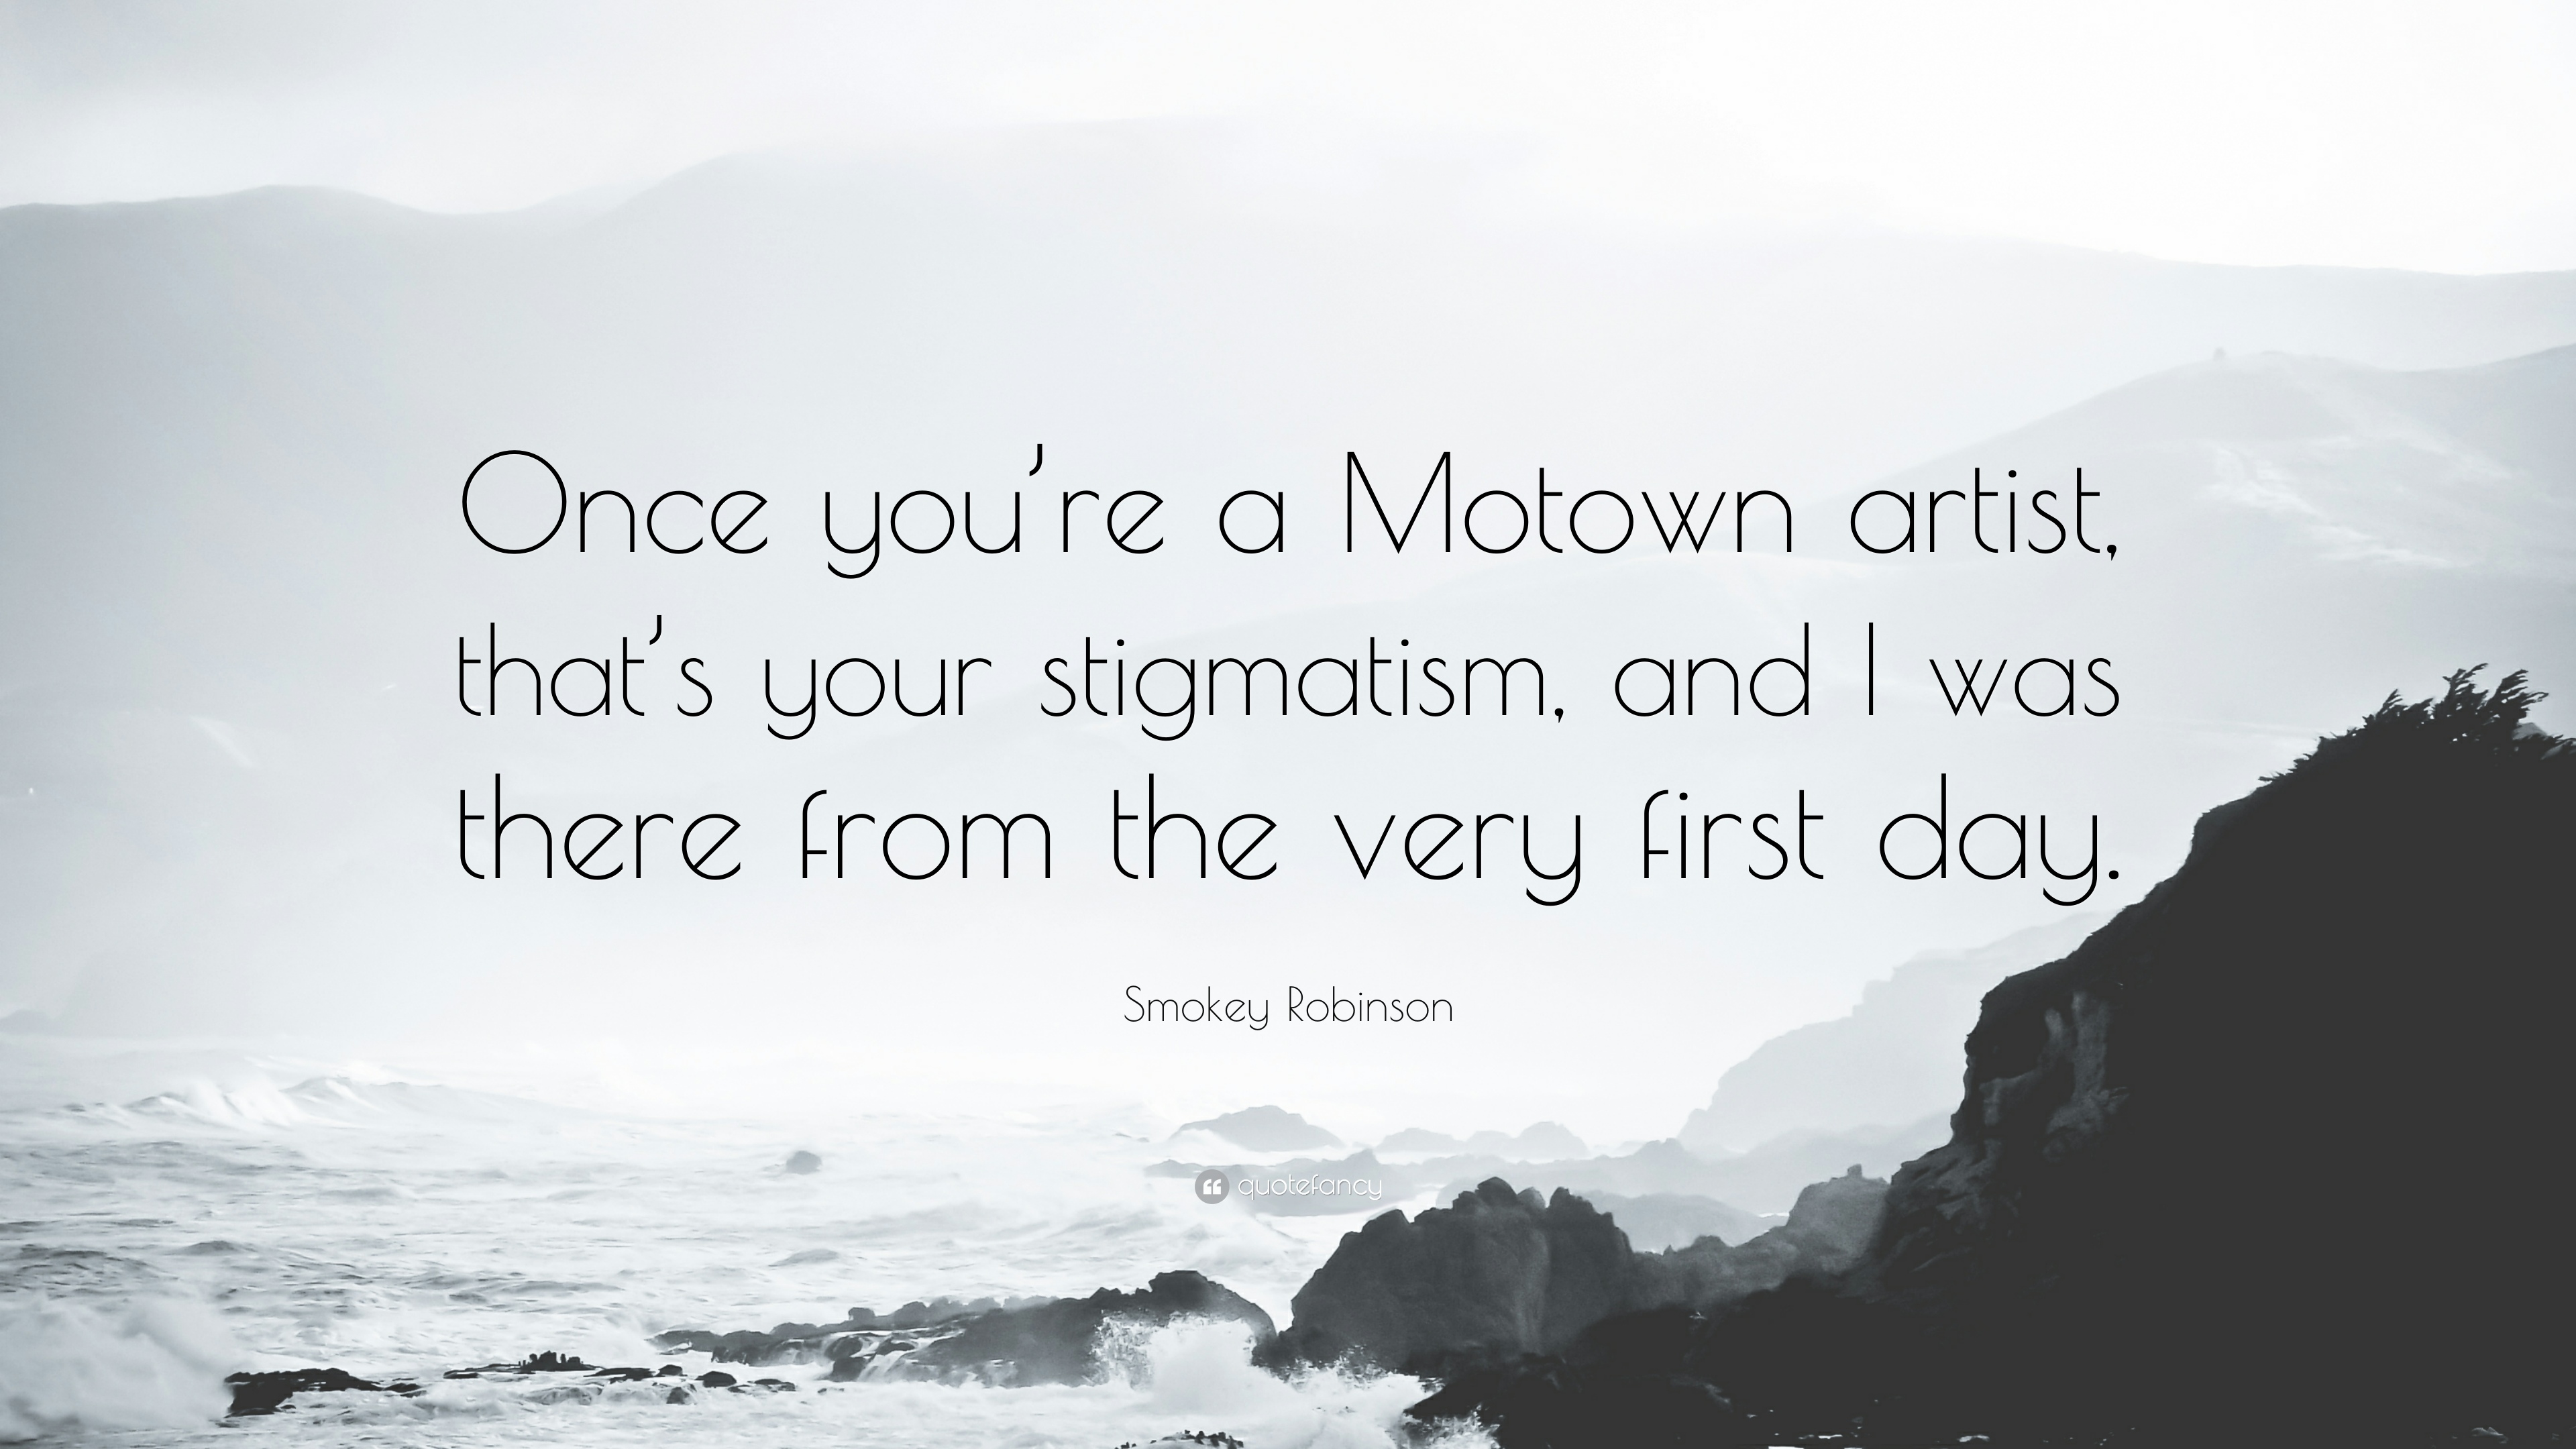 Smokey Robinson Quote: “Once you're a Motown artist, that's your